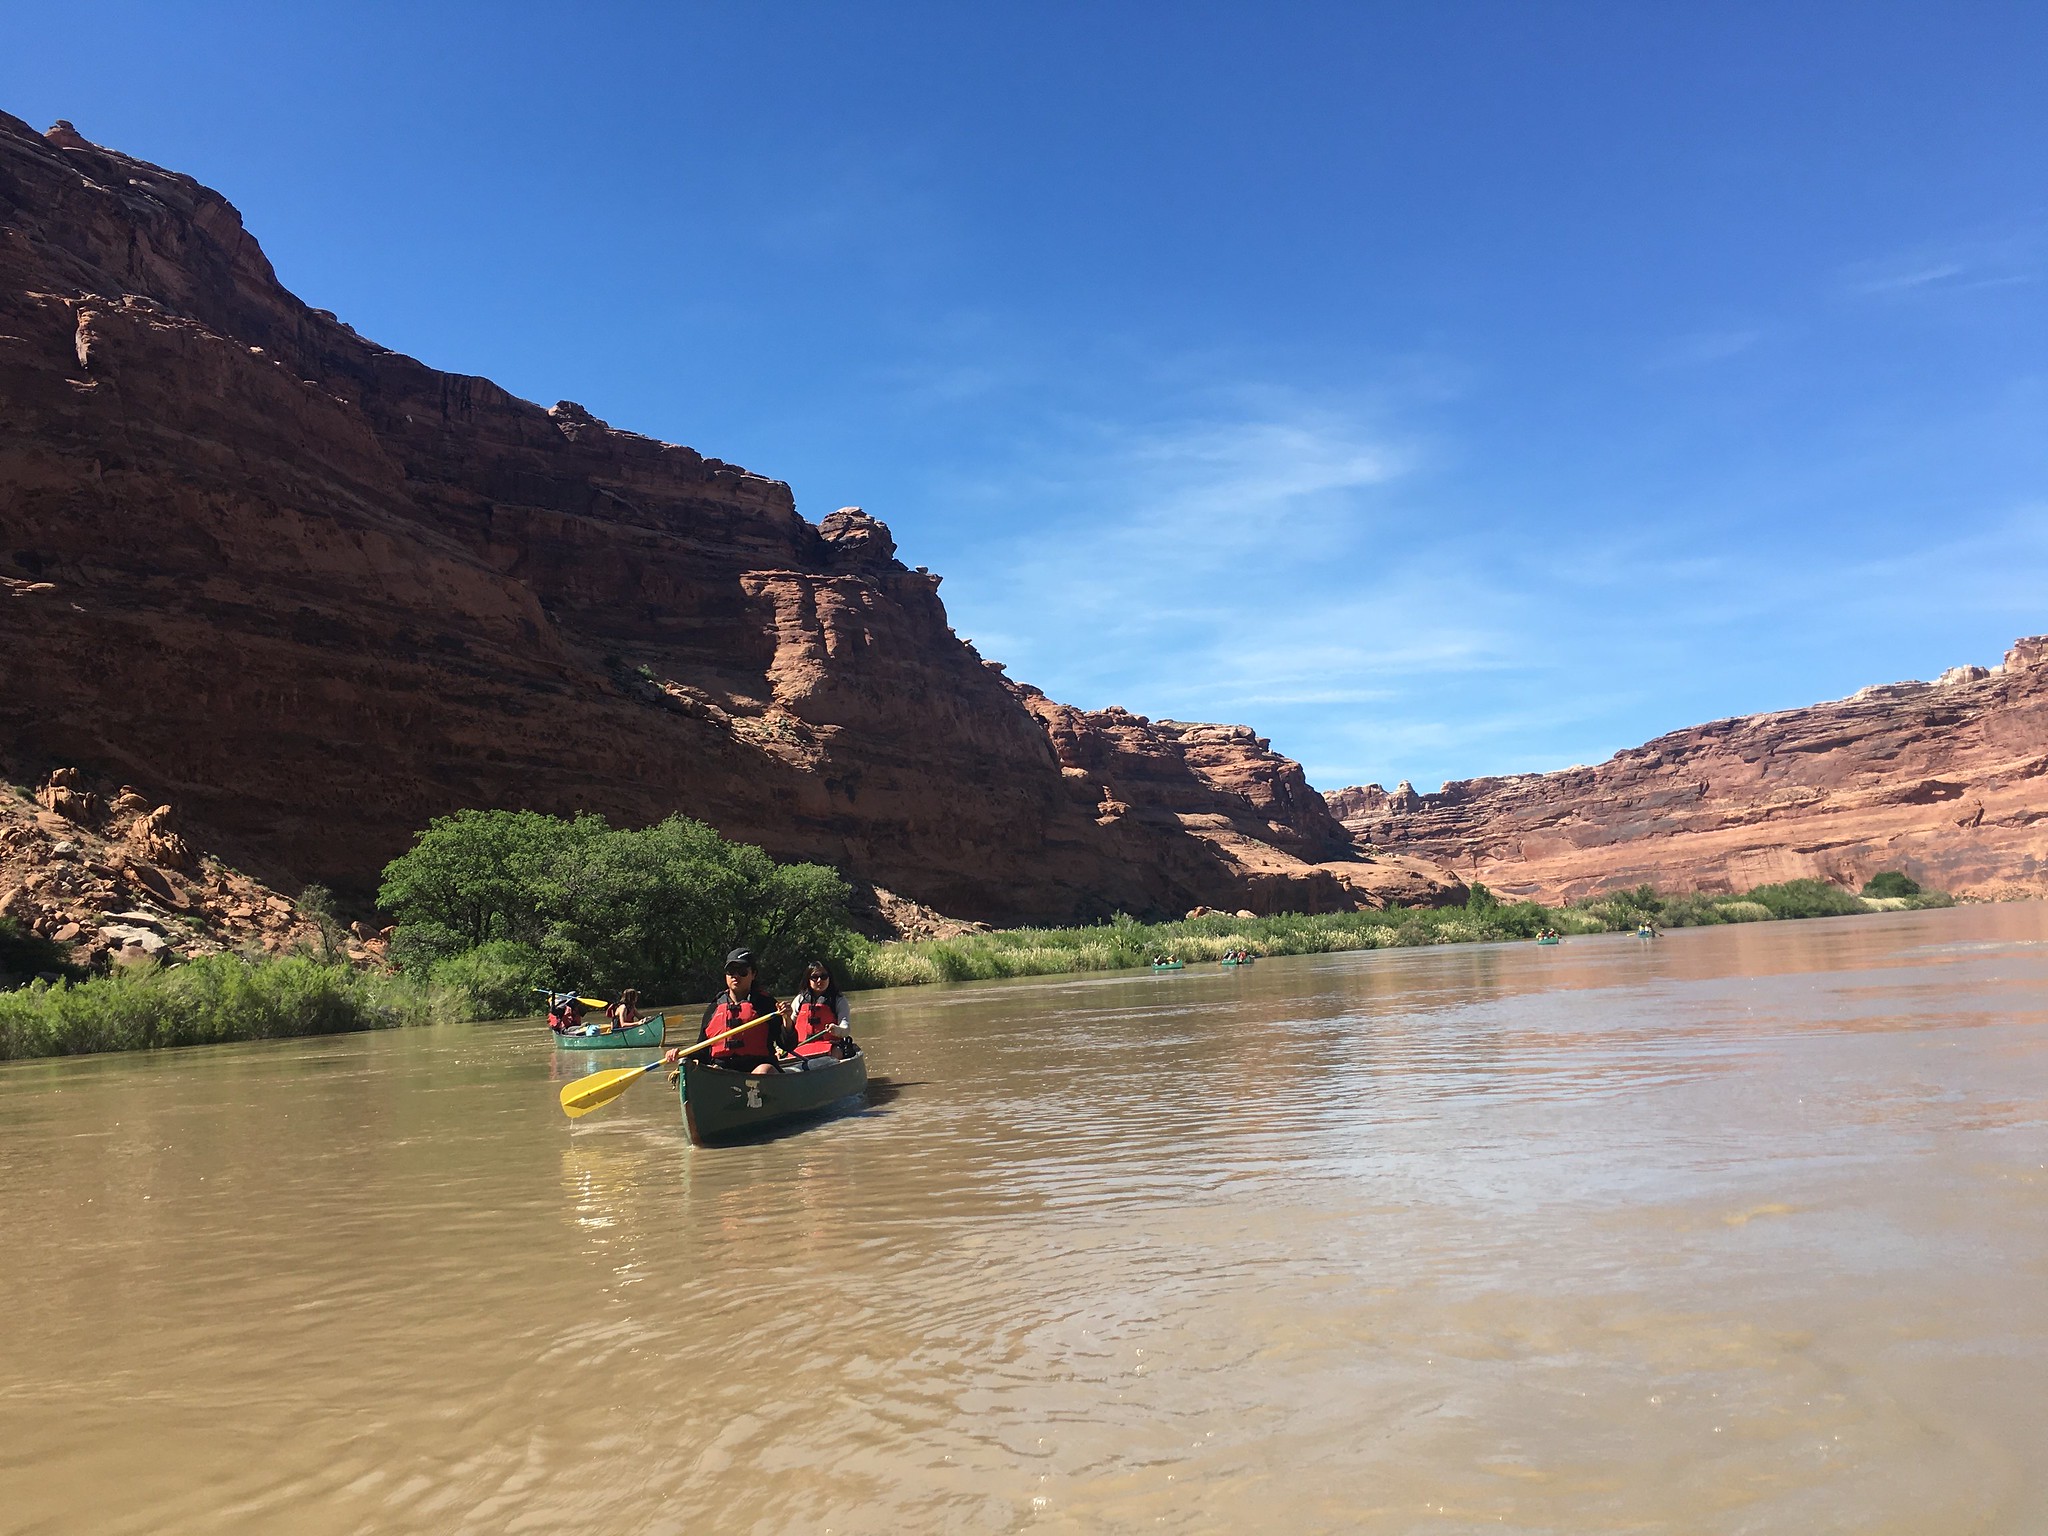 A group of people are paddling canoes downriver. There is current but no whitewater. They are wearing PFDs (personal floatation devices). In the background are sandstone canyon walls, and desert plants along the shoreline. 